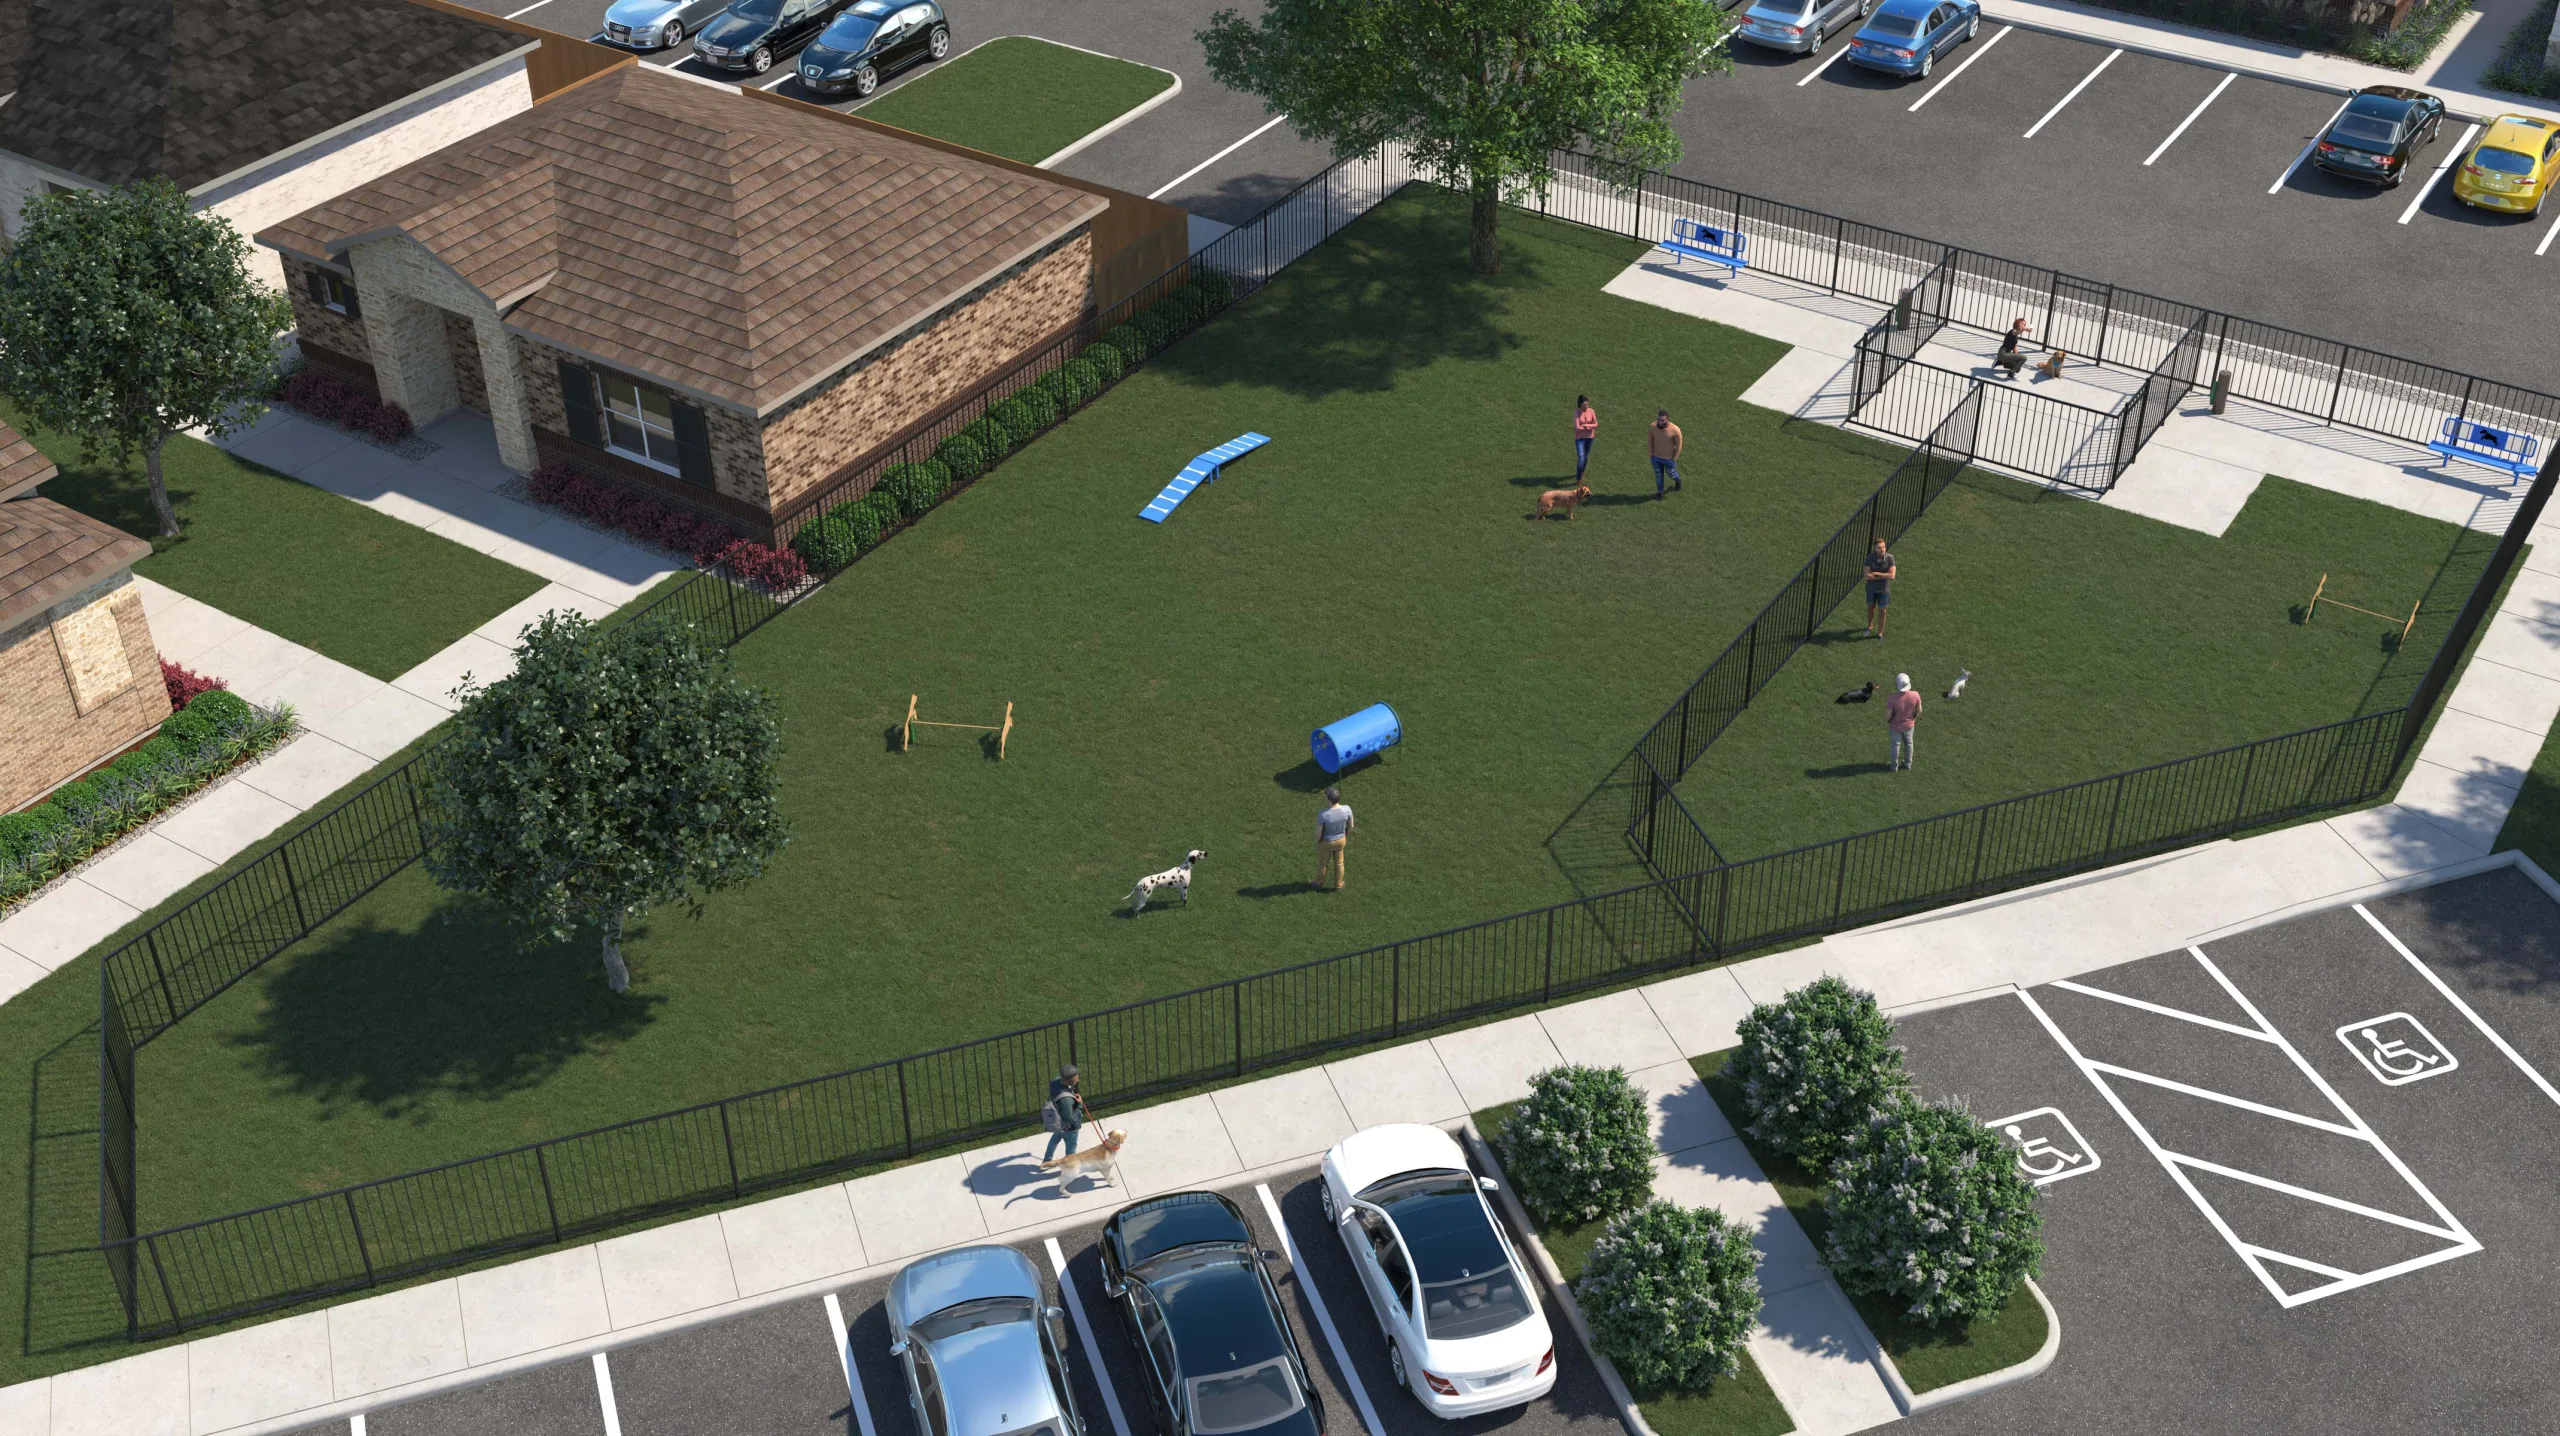 One-story homes for rent with private backyards near Dallas, TX. Rendering of dog park from arial view, fenced park for big dogs and little dogs.